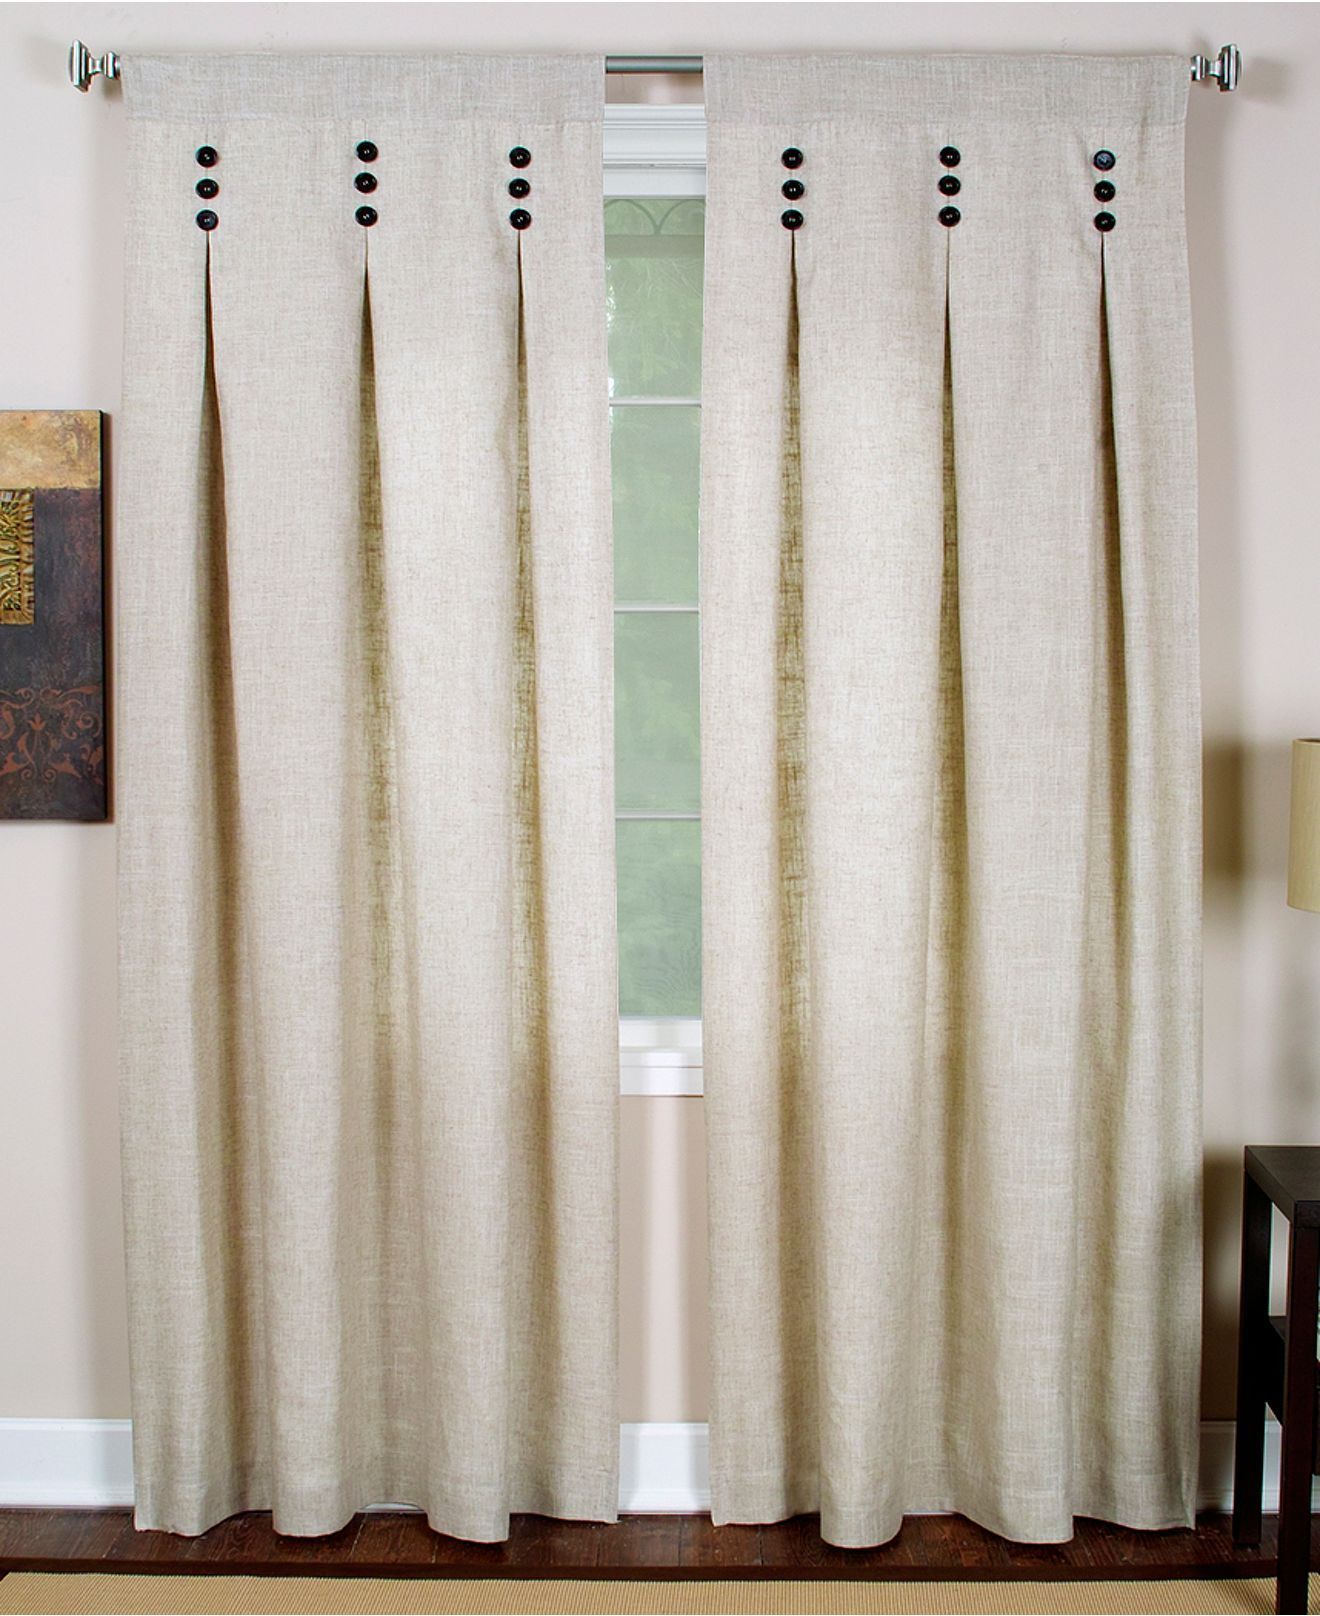 Inverted Box Pleat With Contrast Button Detail | Drape It With Regard To Elrene Versailles Pleated Blackout Curtain Panels (View 17 of 20)